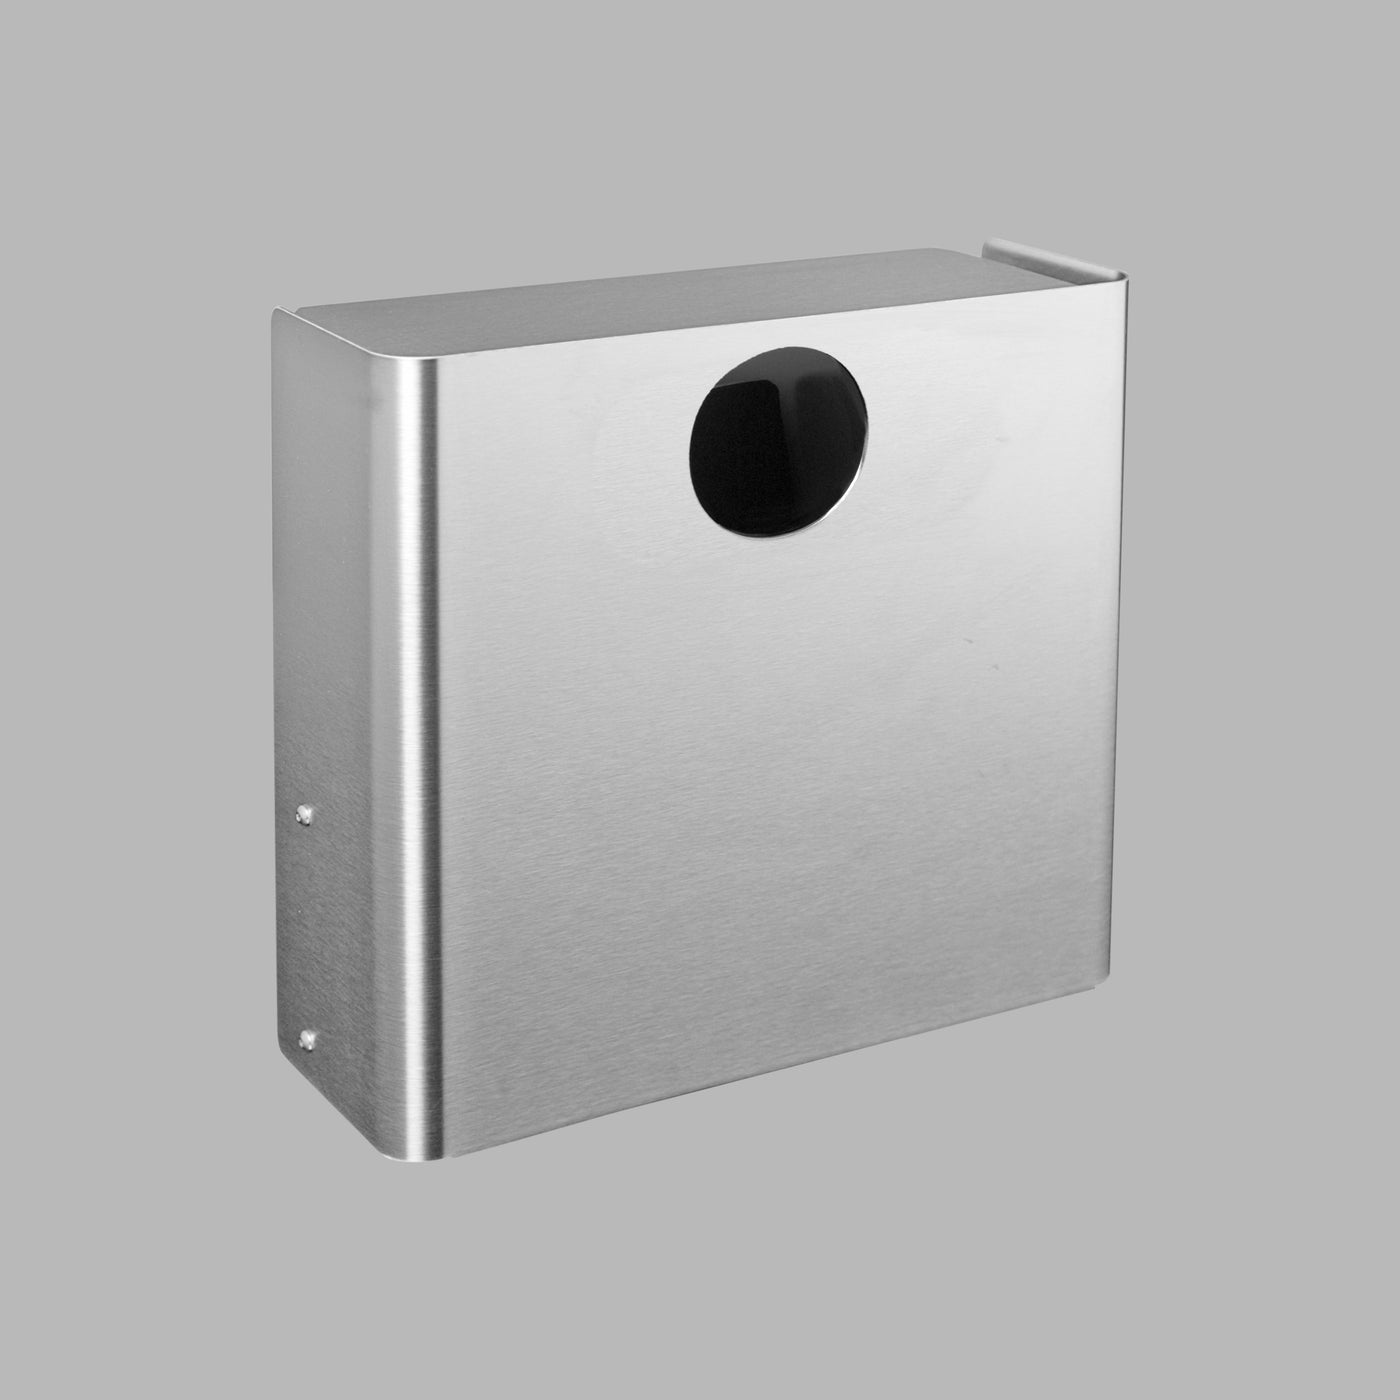 Used for both Residential and Commercial placements, the Knud Soap Dispenser is part of the sanitary line by d line and is available in a variety of finishes.